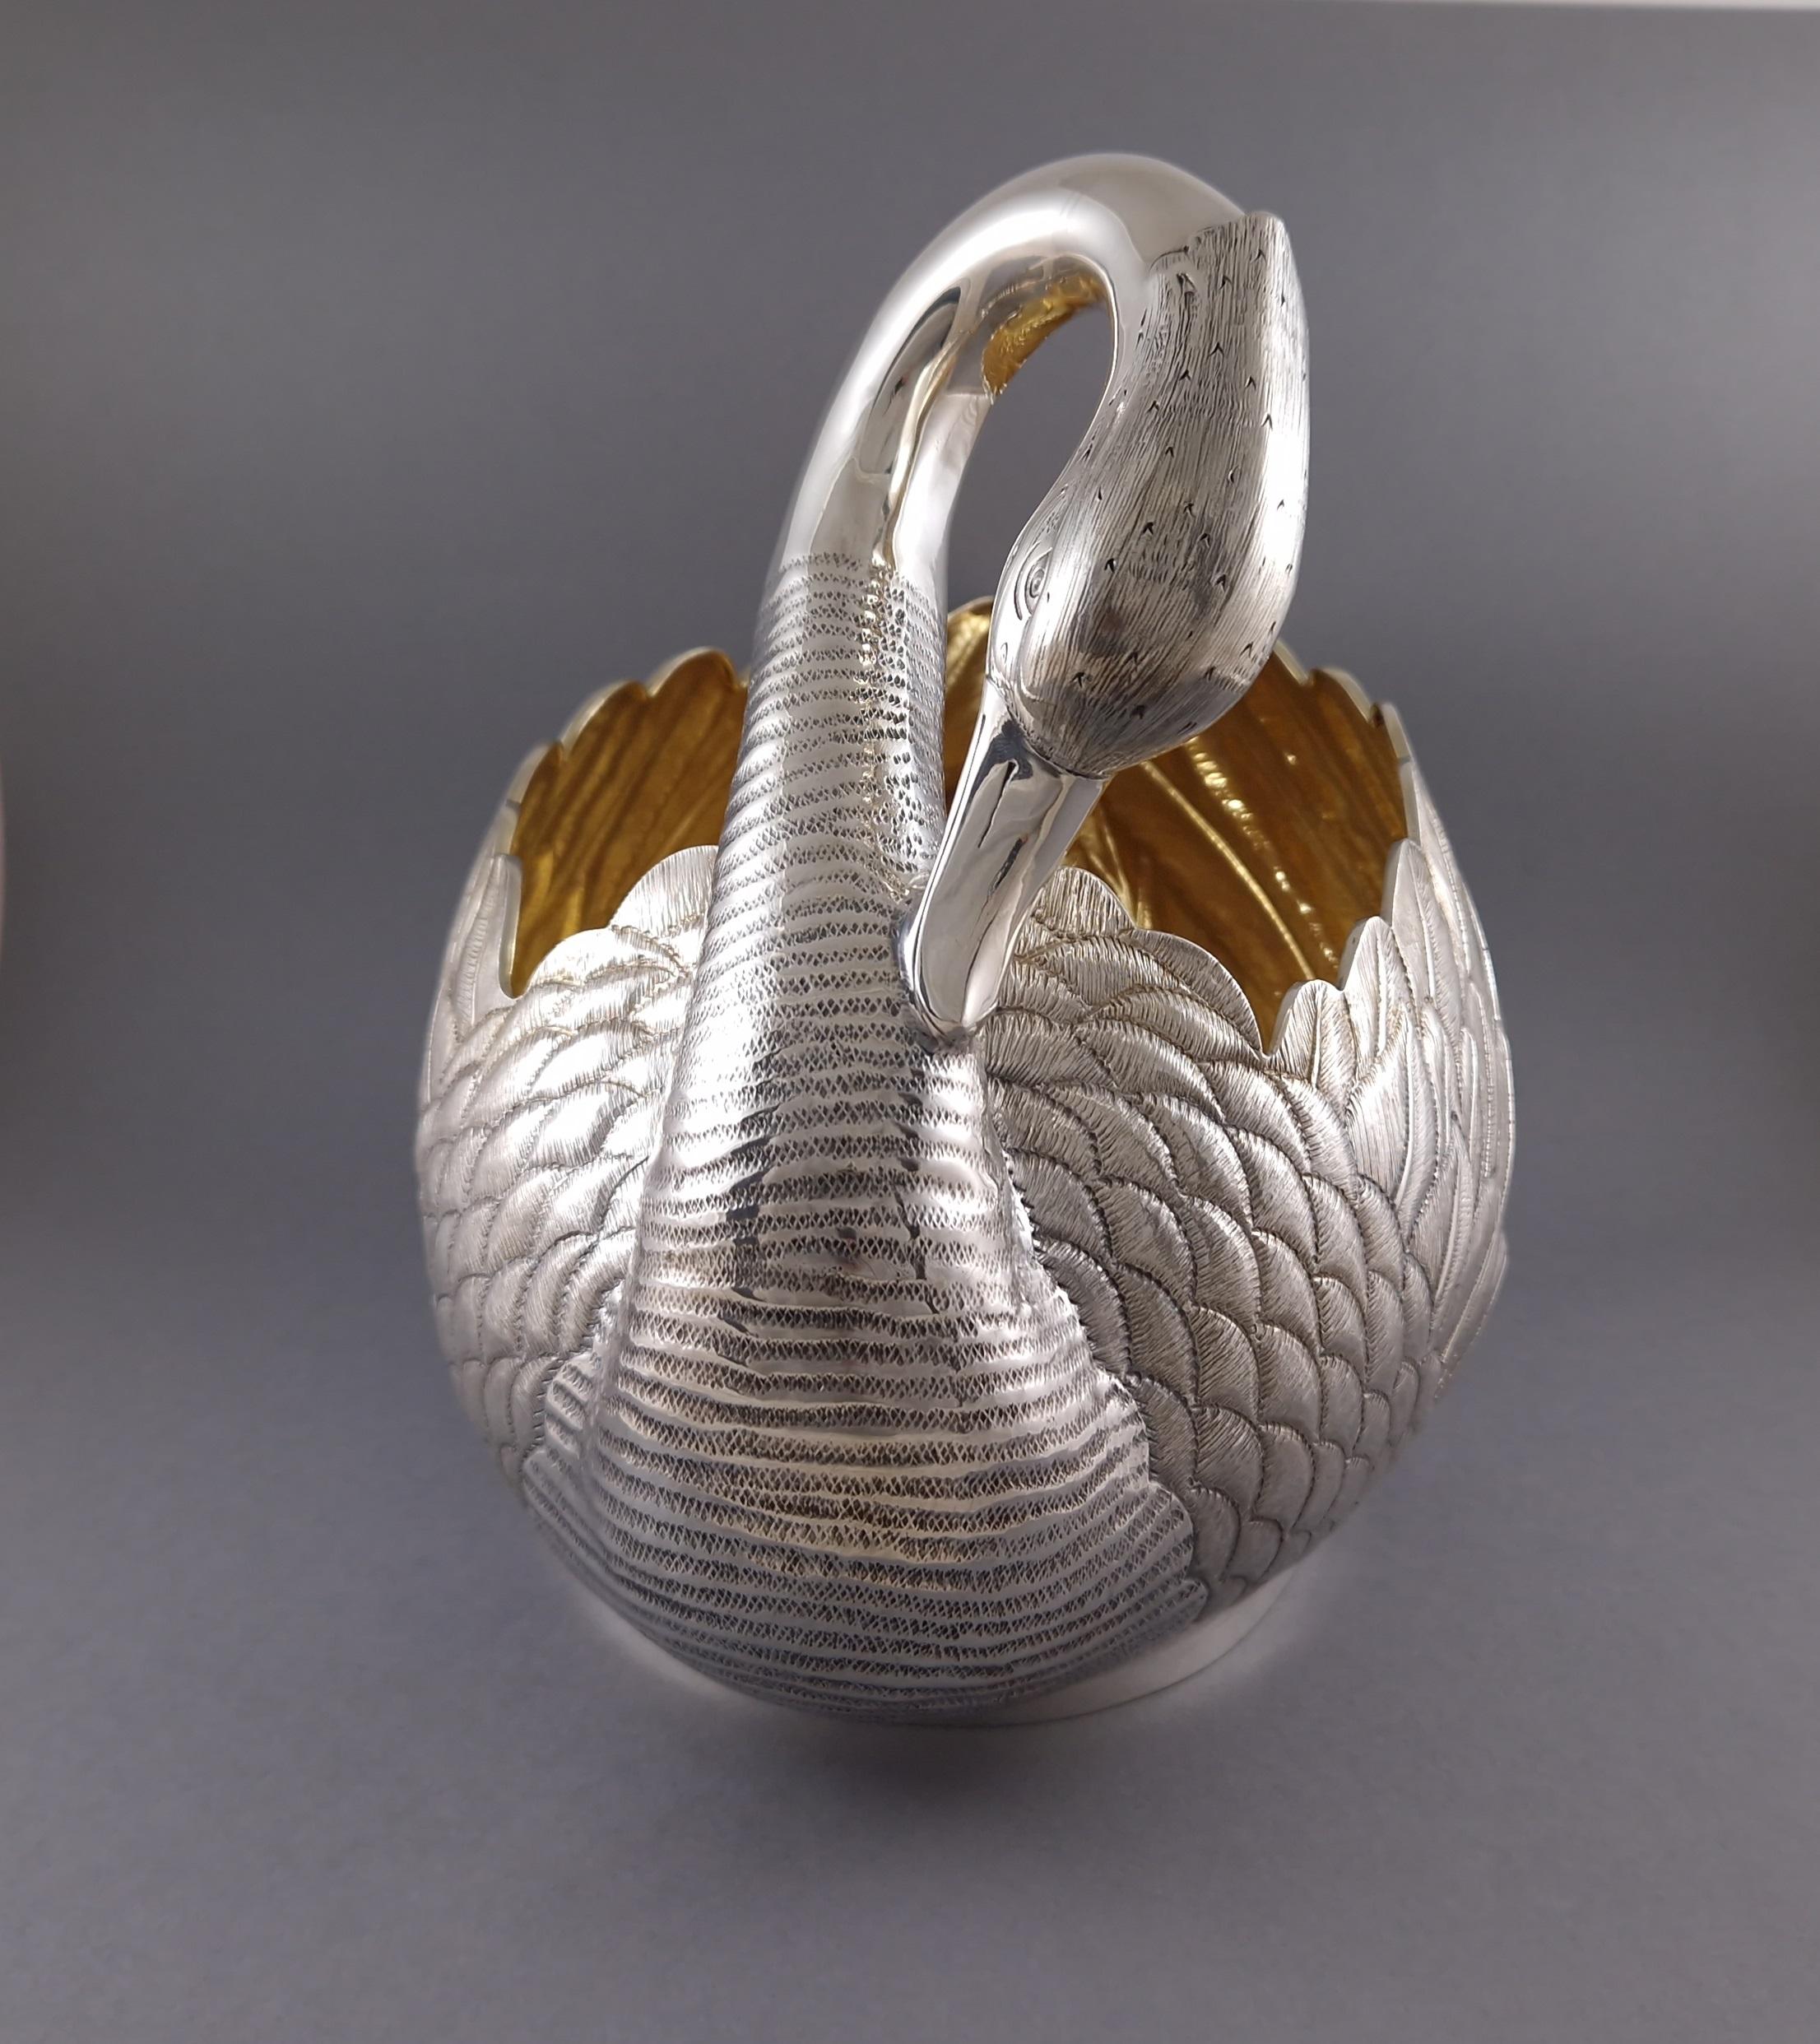 Swan Centerpiece In Sterling Silver And Gilt In Excellent Condition For Sale In Saint-Ouen, FR